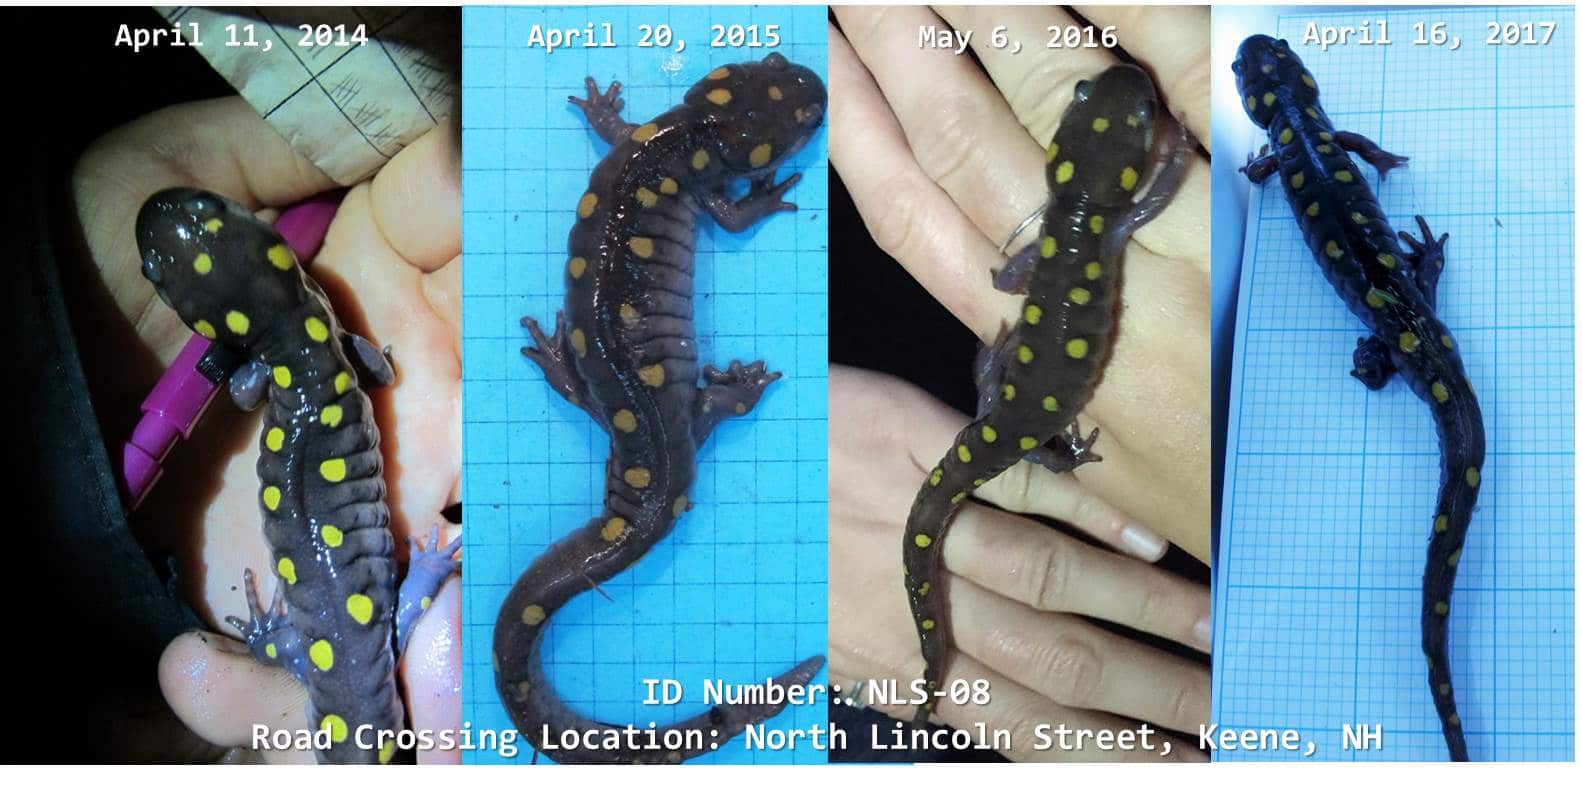 Four photos of the same salamander, taken in four different years, at our North Lincoln Street amphibian crossing site.